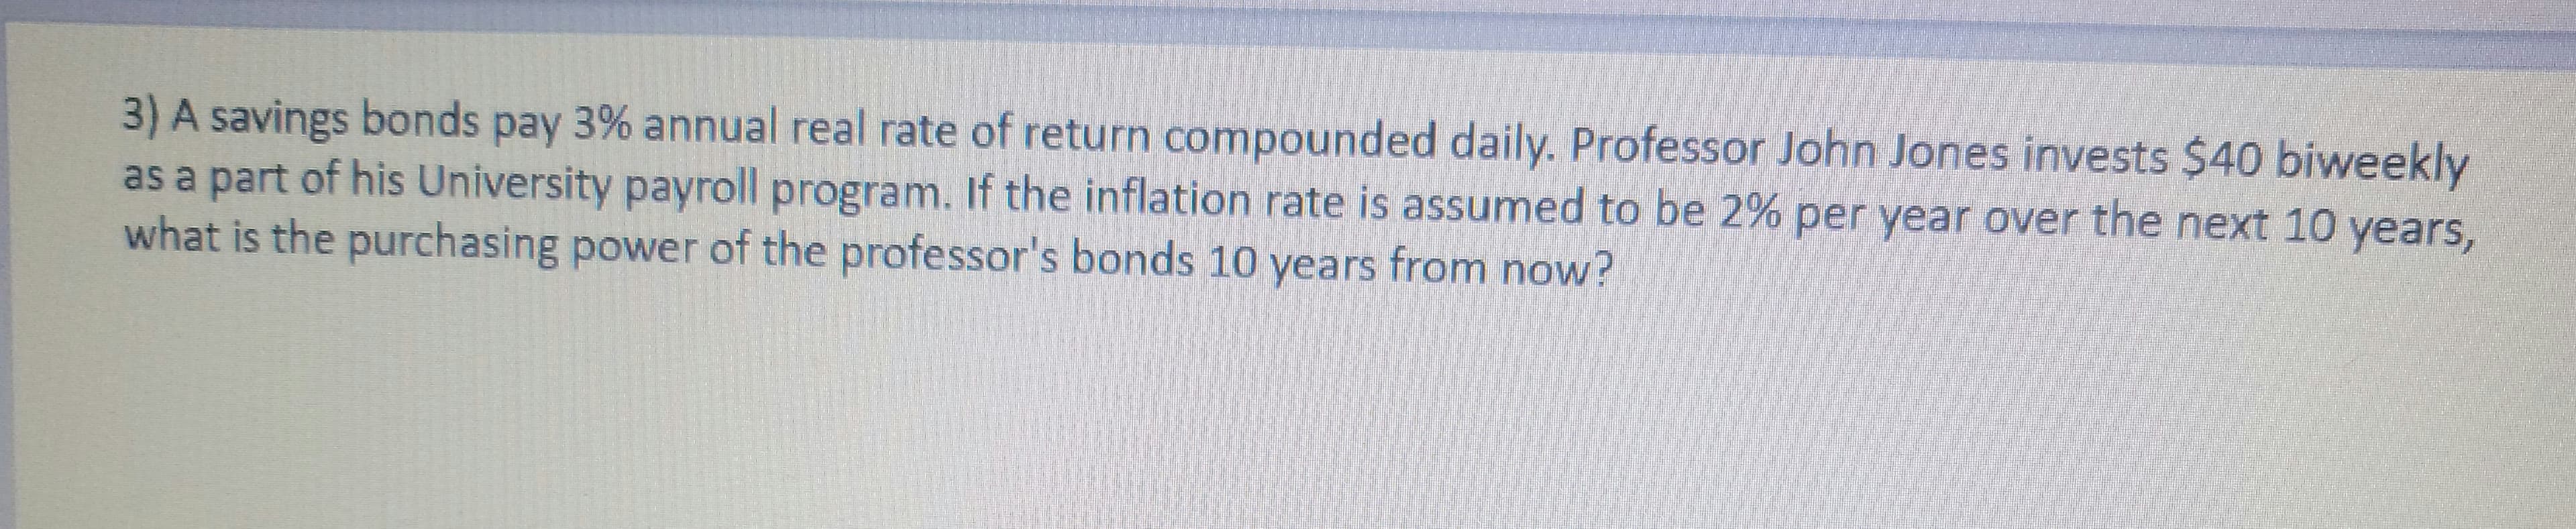 3) A savings bonds pay 3% annual real rate of return compounded daily. Professor John Jones invests $40 biweekly
as a part of his University payroll program. If the inflation rate is assumed to be 2% per year over the next 10 years,
what is the purchasing power of the professor's bonds 10 years from now?
